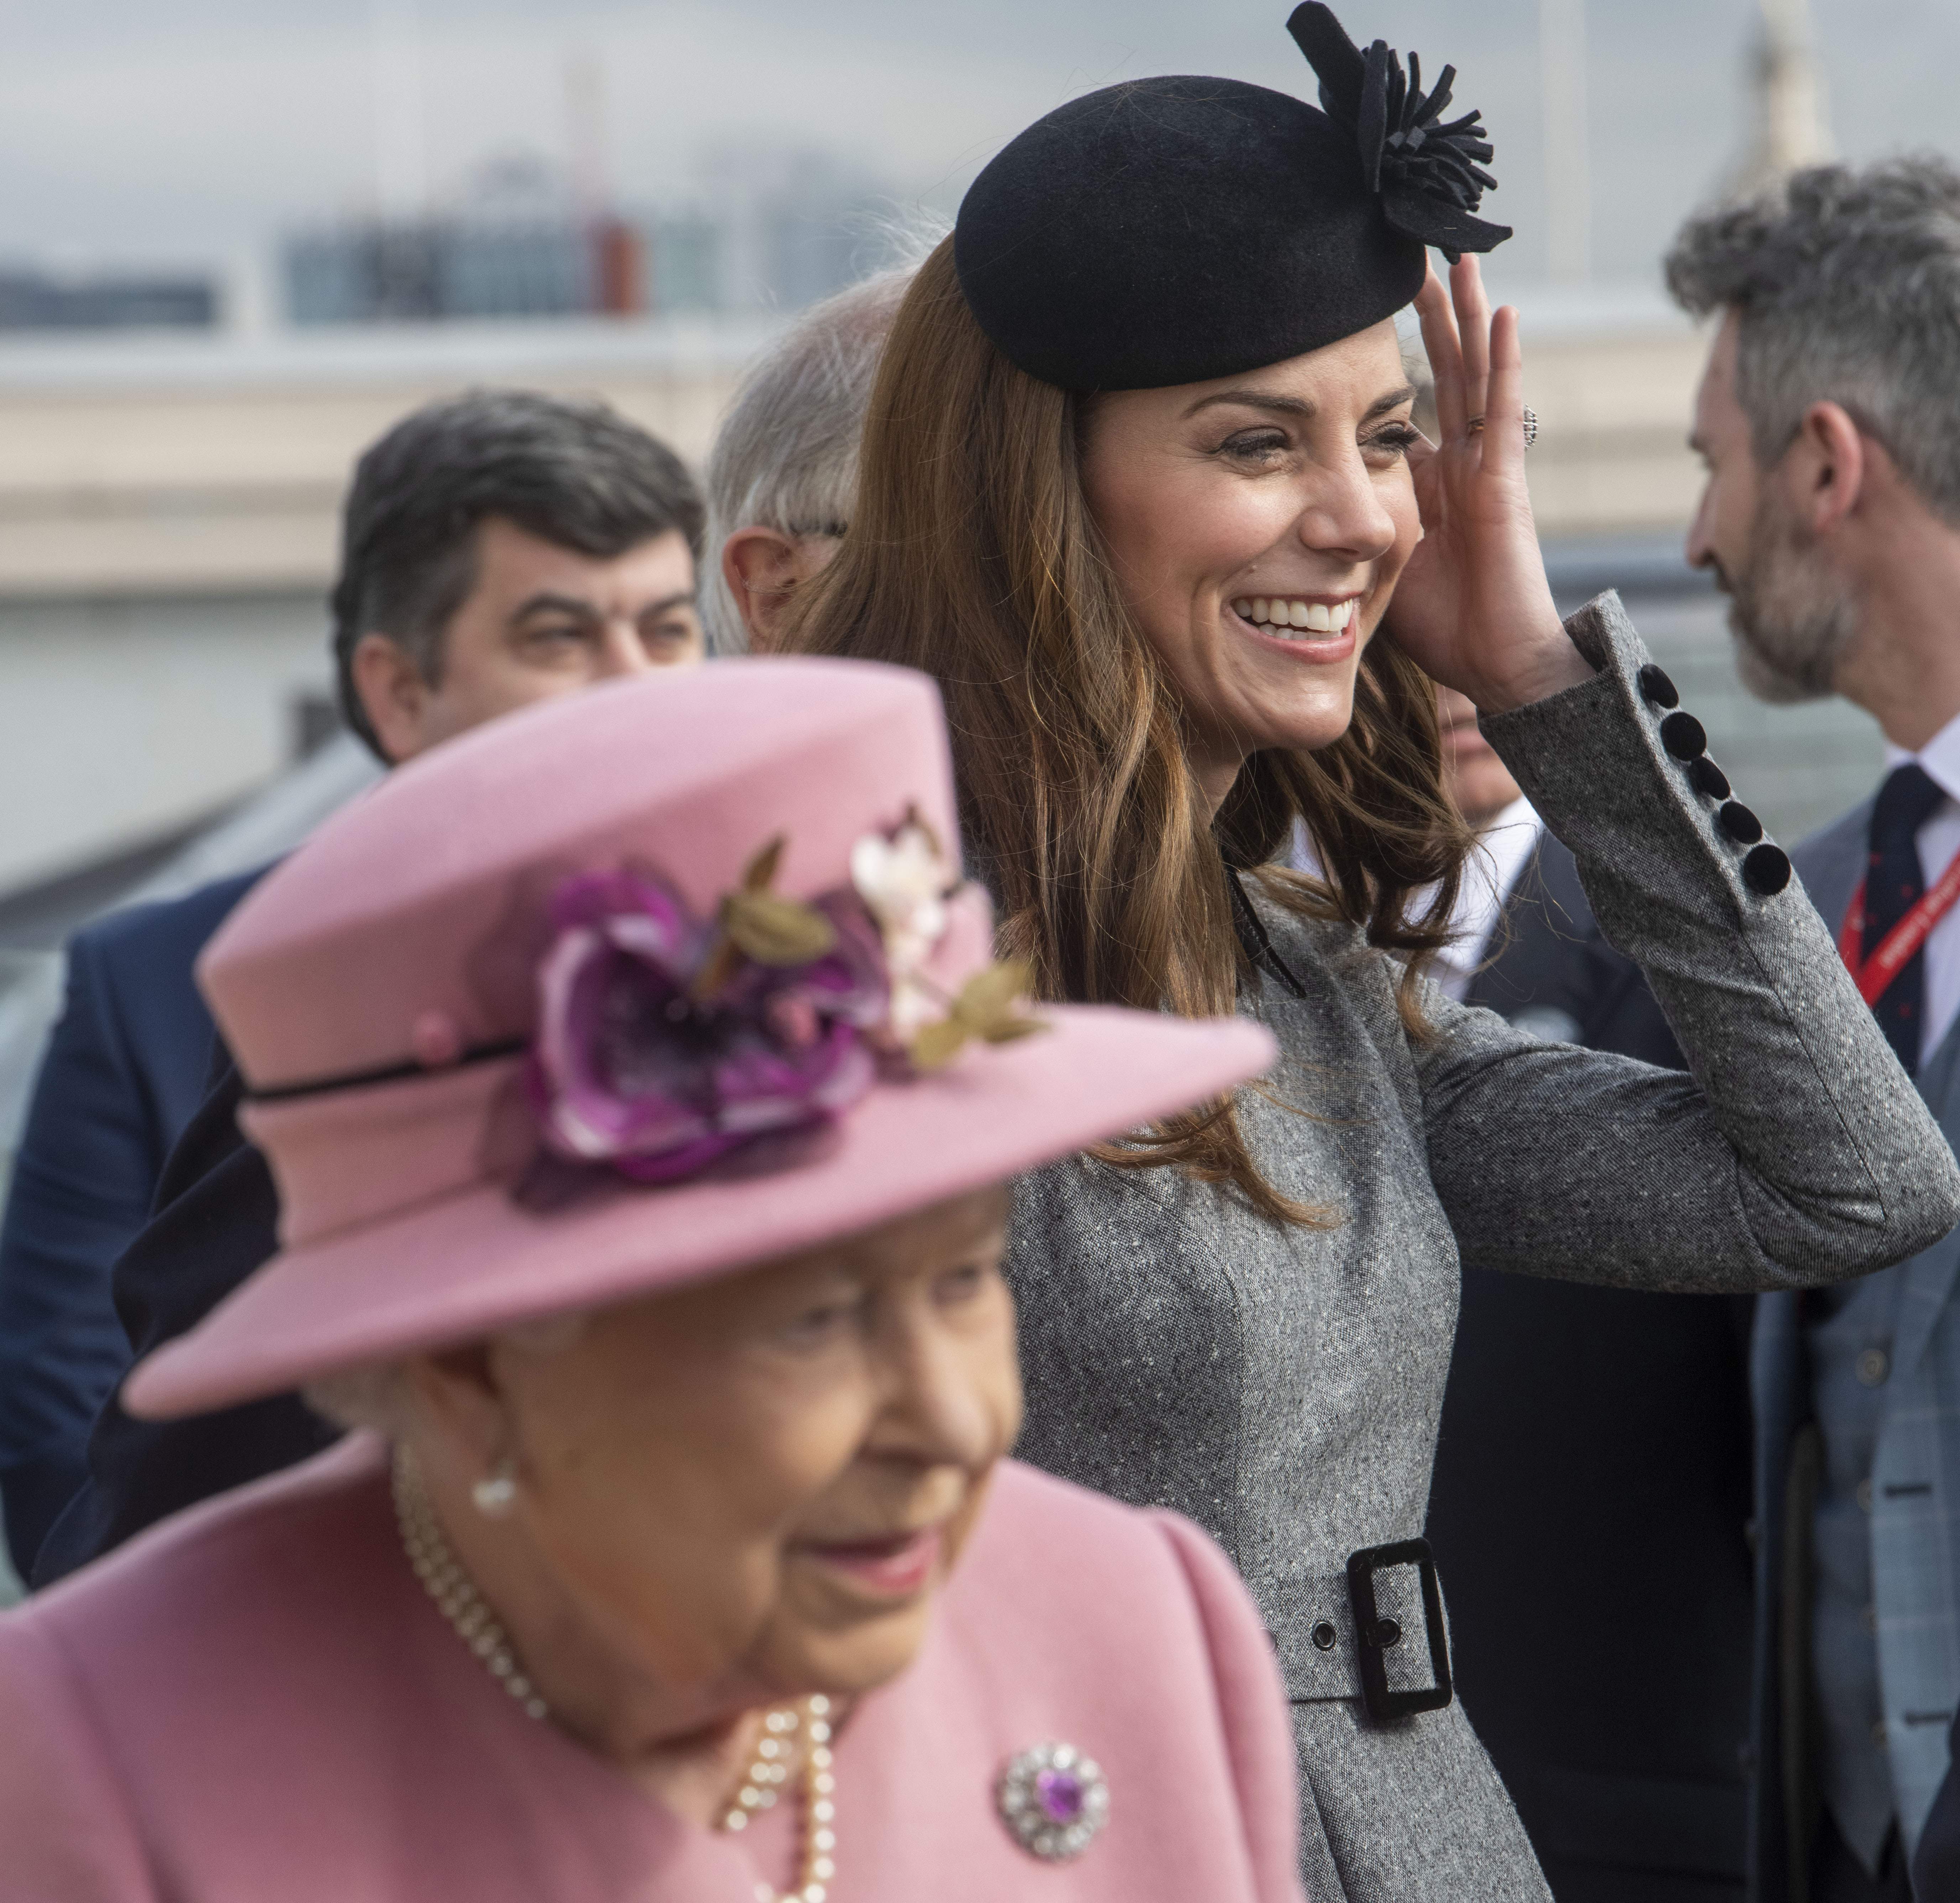 Queen Elizabeth II and Duchess Kate visit Kings College to open Bush House in central London on March 19, 2019 | Source: Getty Images